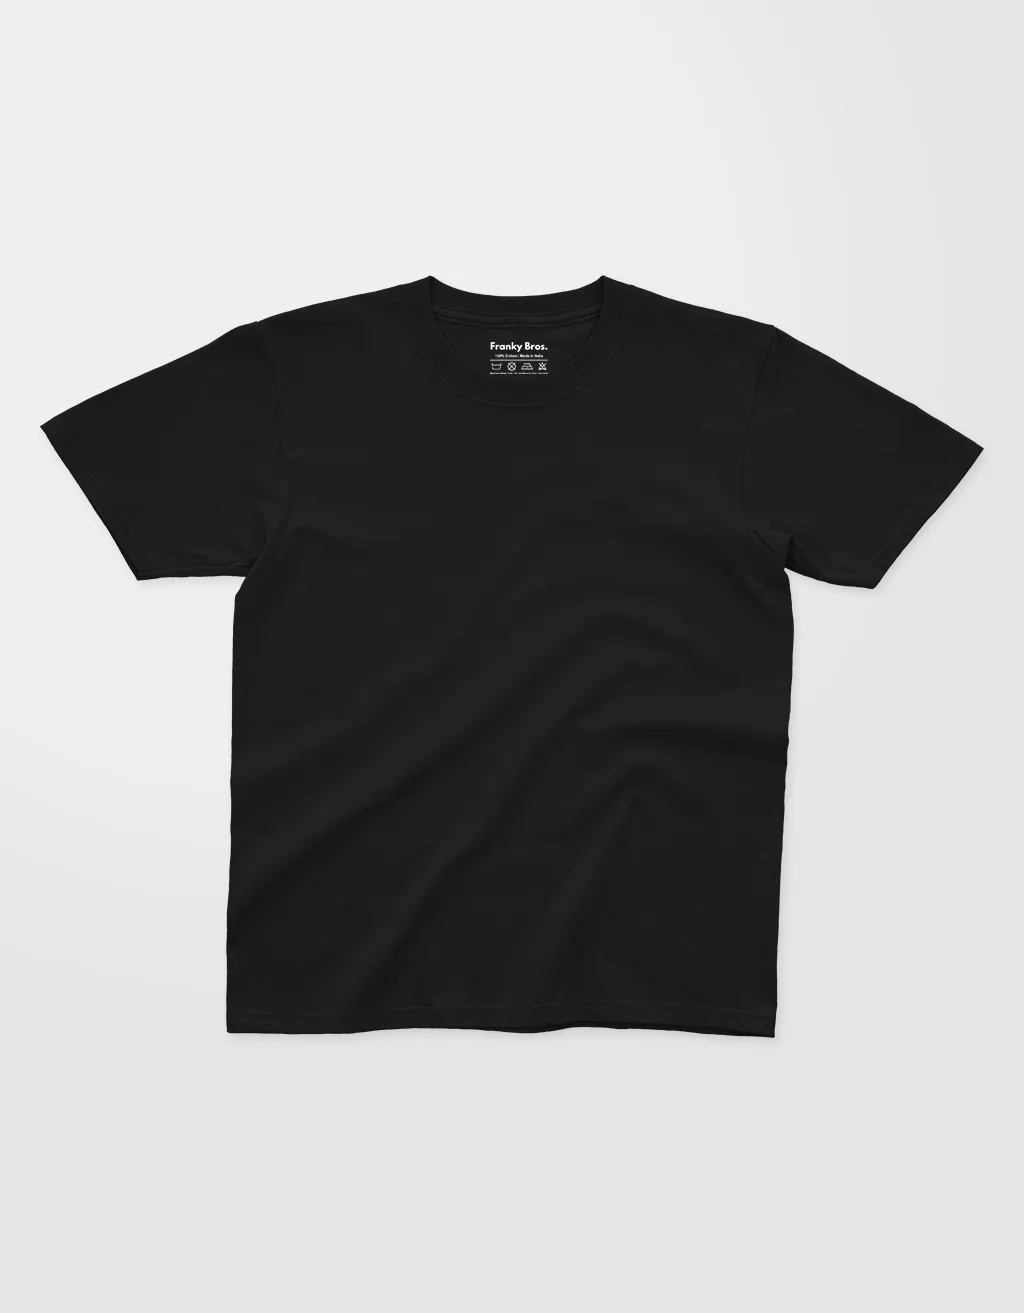 kids black t shirt for girls and boys online in india